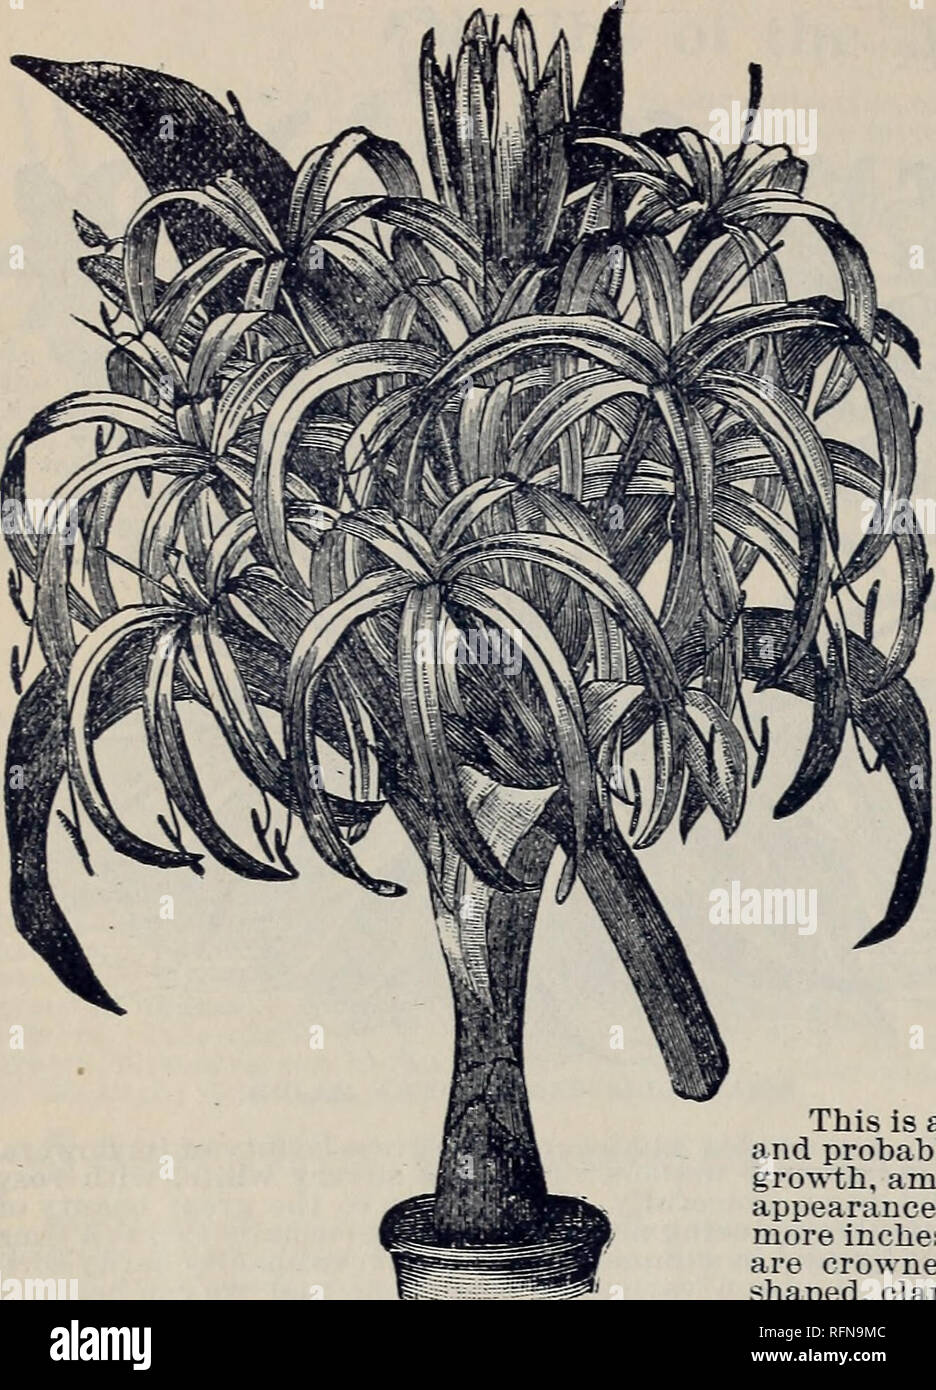 . Rare Florida flowers and fruits. Nurseries (Horticulture), Florida, Catalogs; Flowers, Catalogs; Plants, Ornamental, Catalogs; Shrubs, Catalogs. 28 JESSAMINE GARDENS. JESSAMINE, FLORIDA.. CRINUM AMERICA NUM. An evergreen speeies and of the easiest culture, is best grown as a pot plant and can be wintered in the cellar if the soil is kept nearly dry. Like most Amaryllis the Crinums bloom best when somewhart pot-bound. Its large white, exquisitely fra- grant, Lily-like flowers are produced in an umbel and borne on a tall scape. A striking plant and far more beautiful than many of the high pric Stock Photo